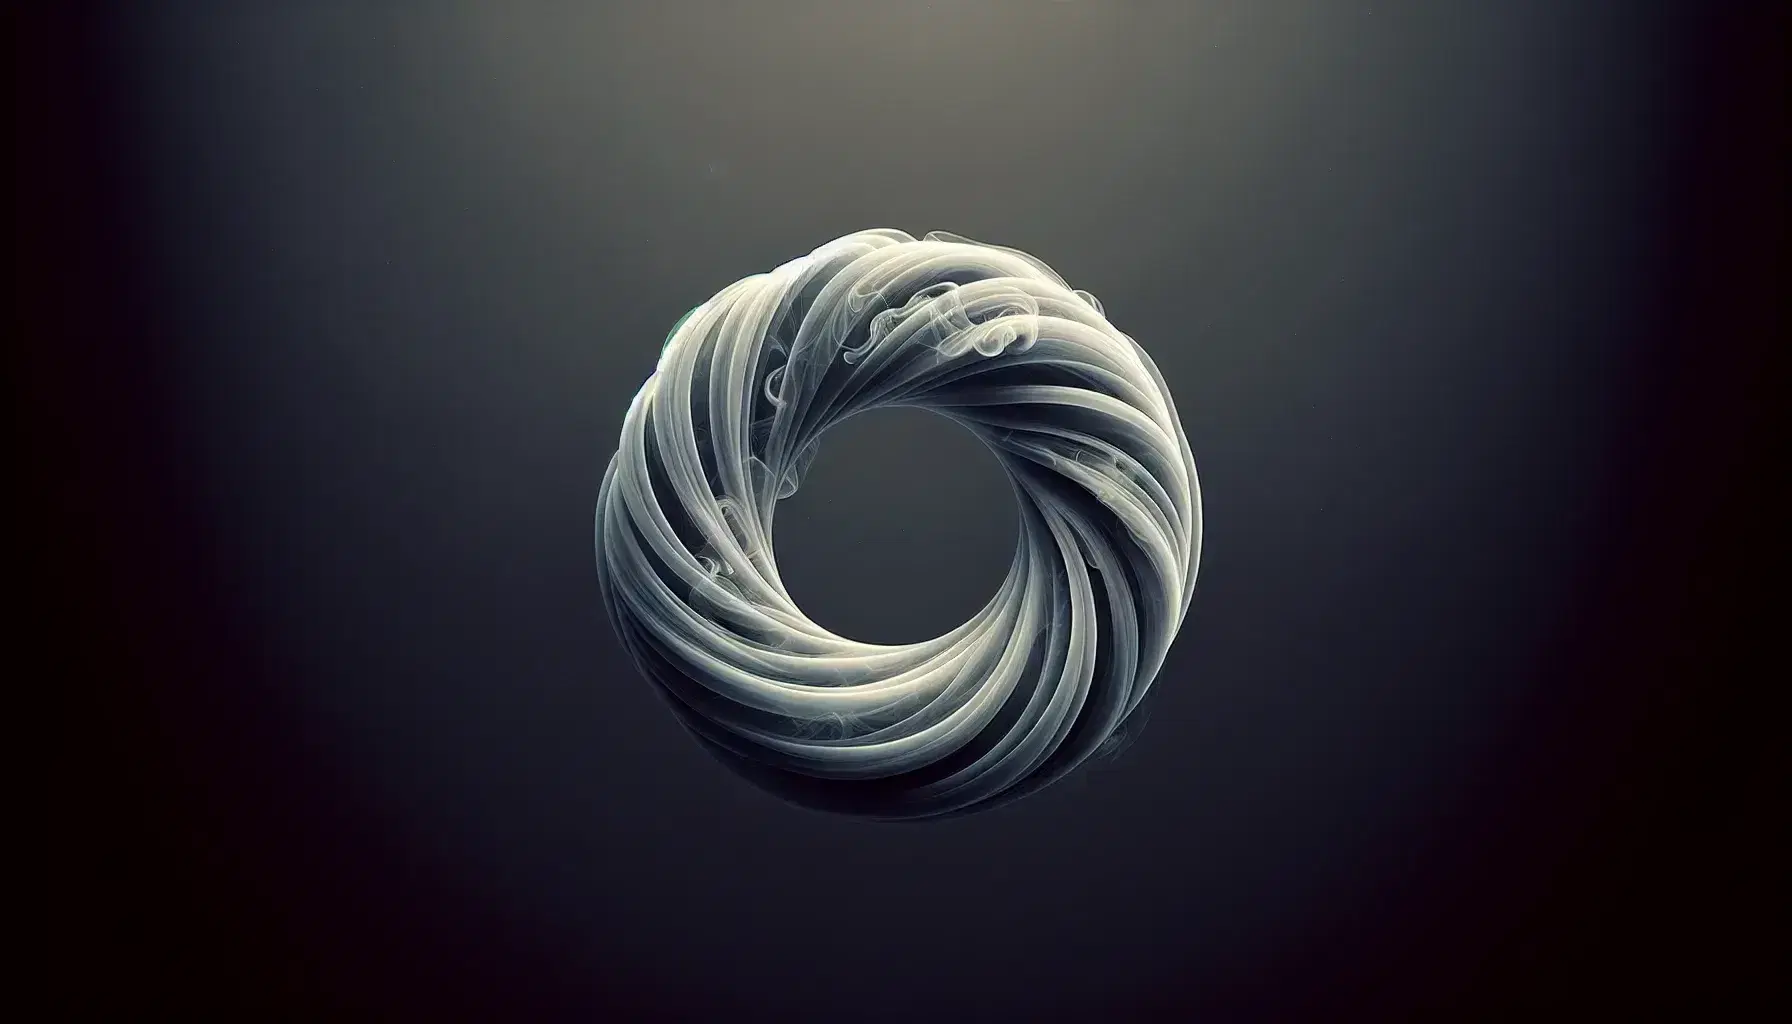 Smoke ring captured in mid-air with a gradient gray background, showcasing the toroidal shape and fluid dynamics of the swirling smoke.